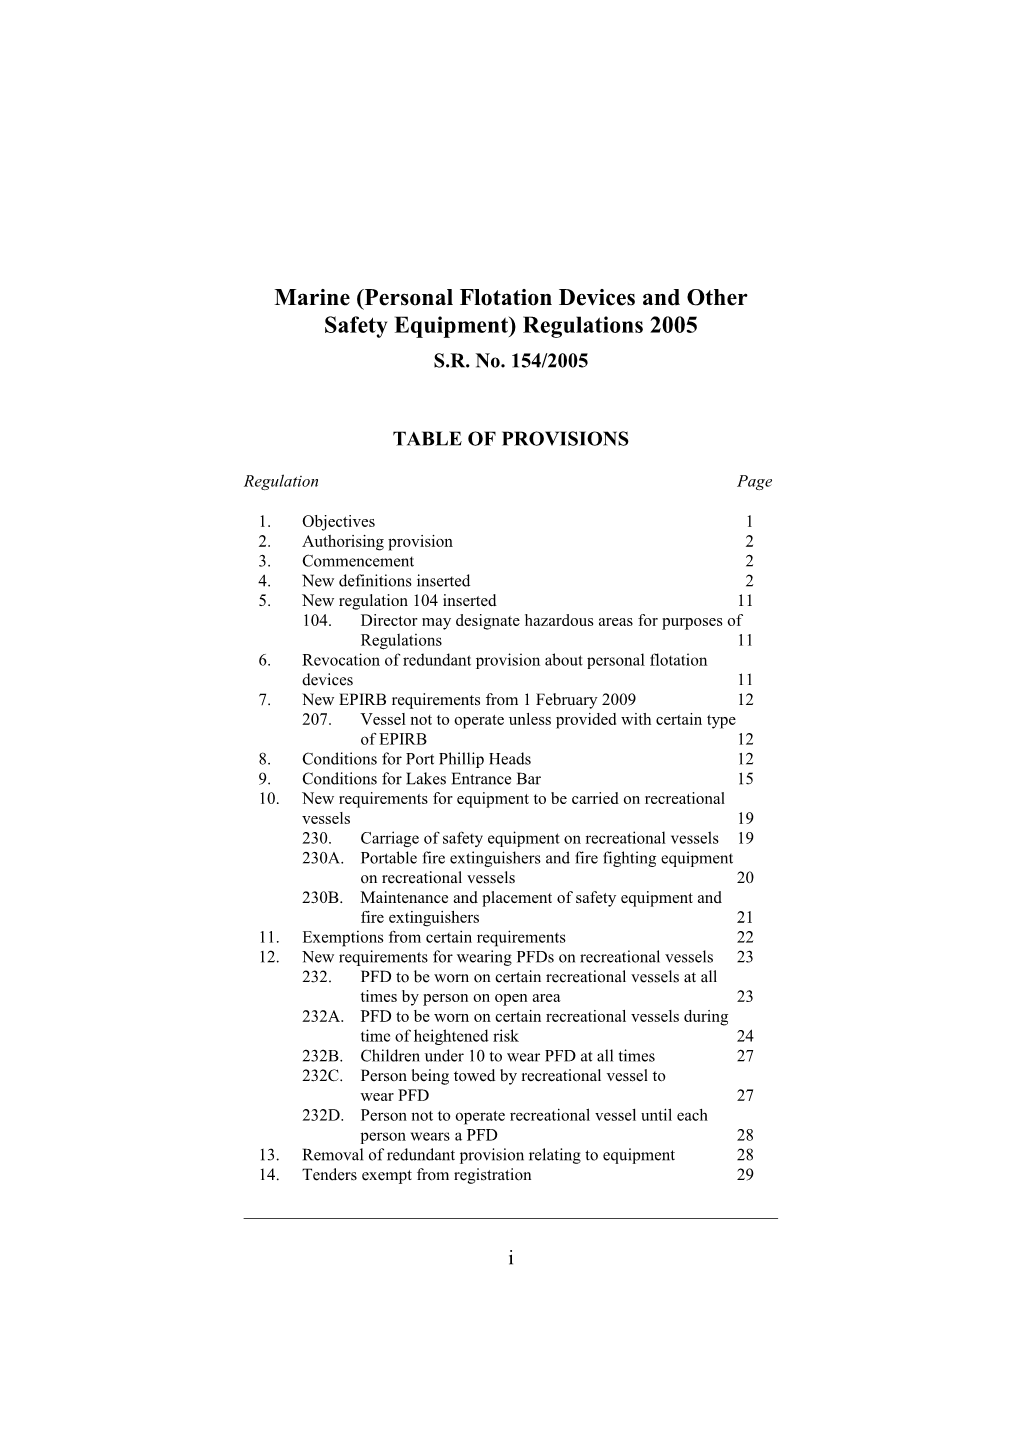 Marine (Personal Flotation Devices and Other Safety Equipment) Regulations 2005